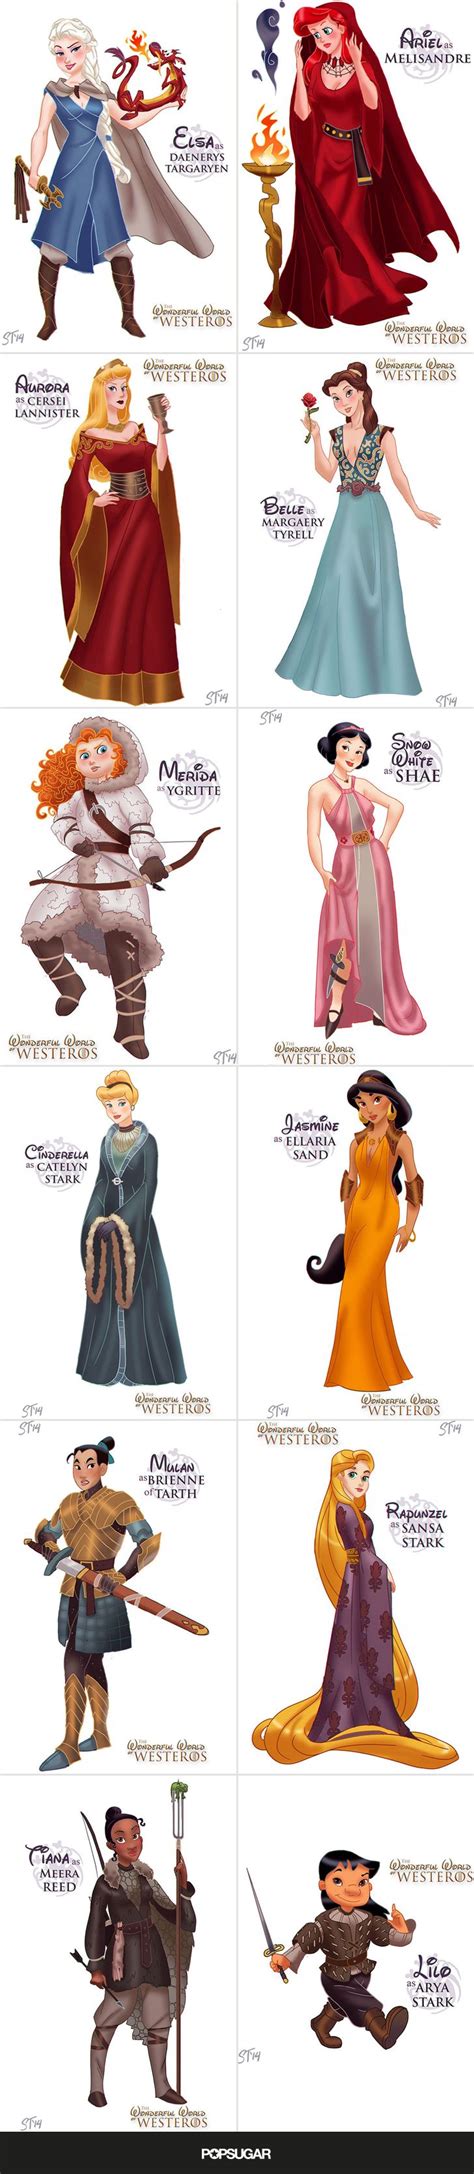 disney princesses as the women of game of thrones disney princess game of thrones and disney